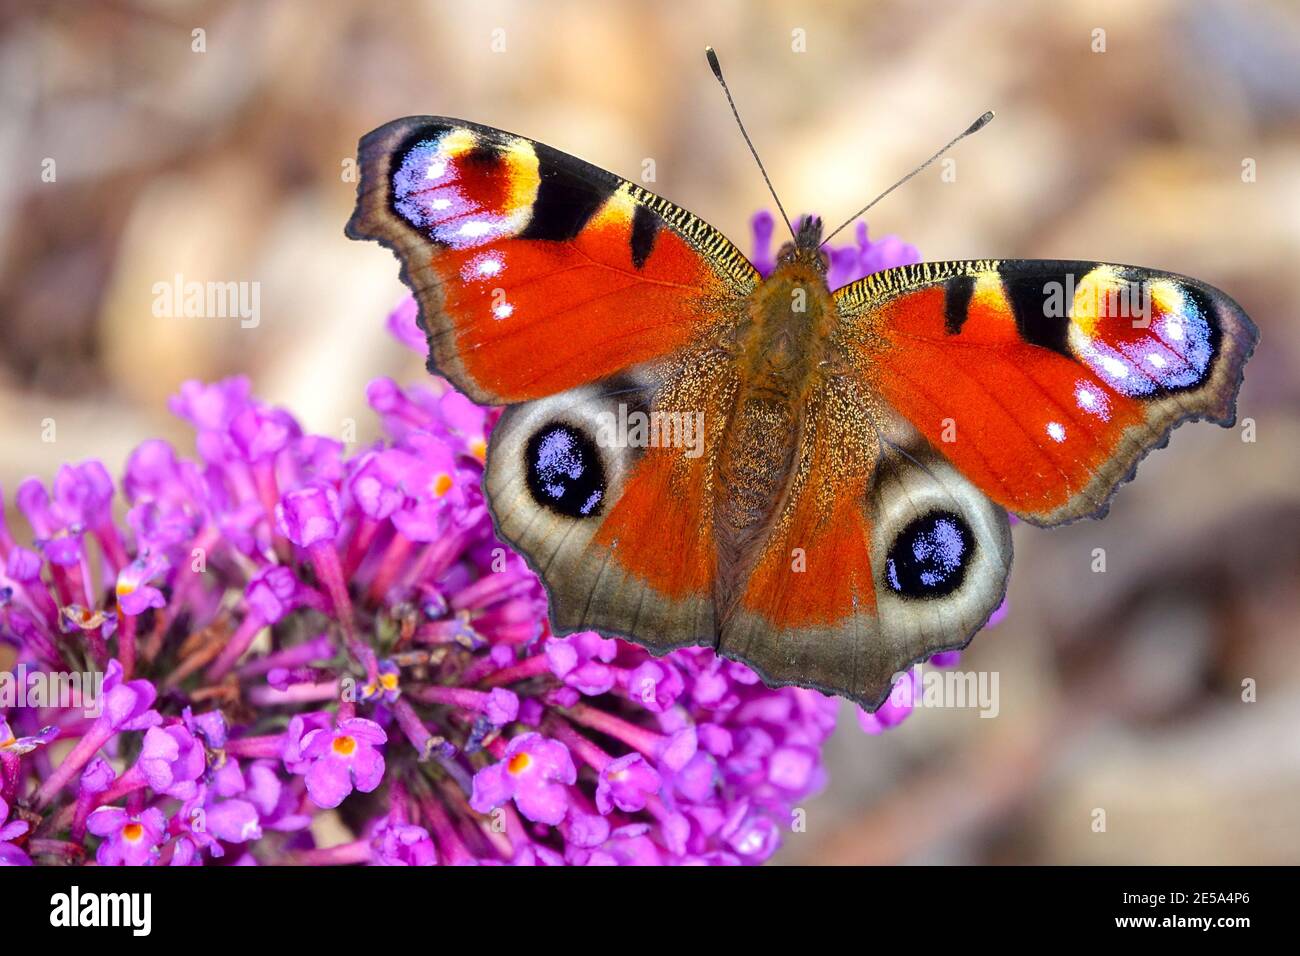 Aglais io Peacock  butterfly Inachis io butterfly on Buddleia flower Stock Photo